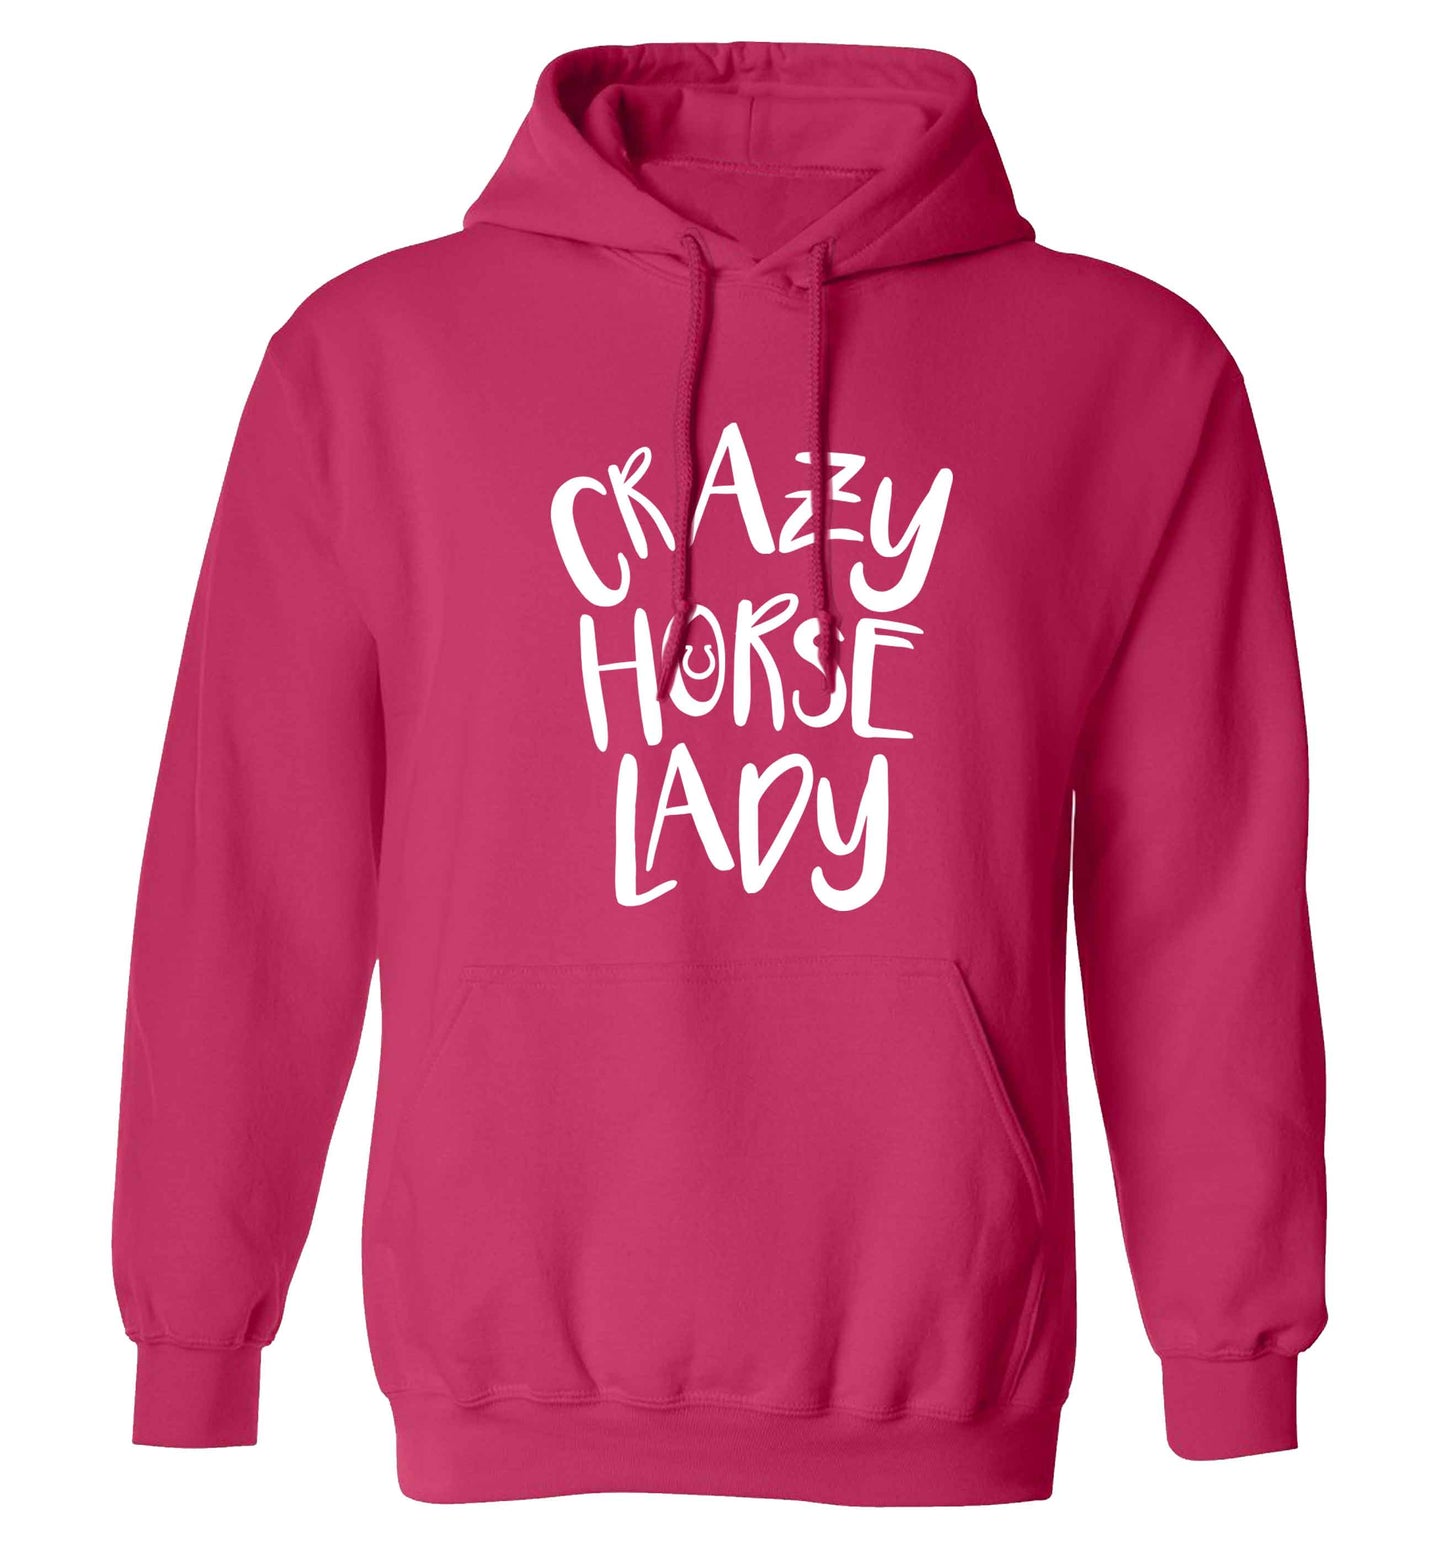 Crazy horse lady adults unisex pink hoodie 2XL